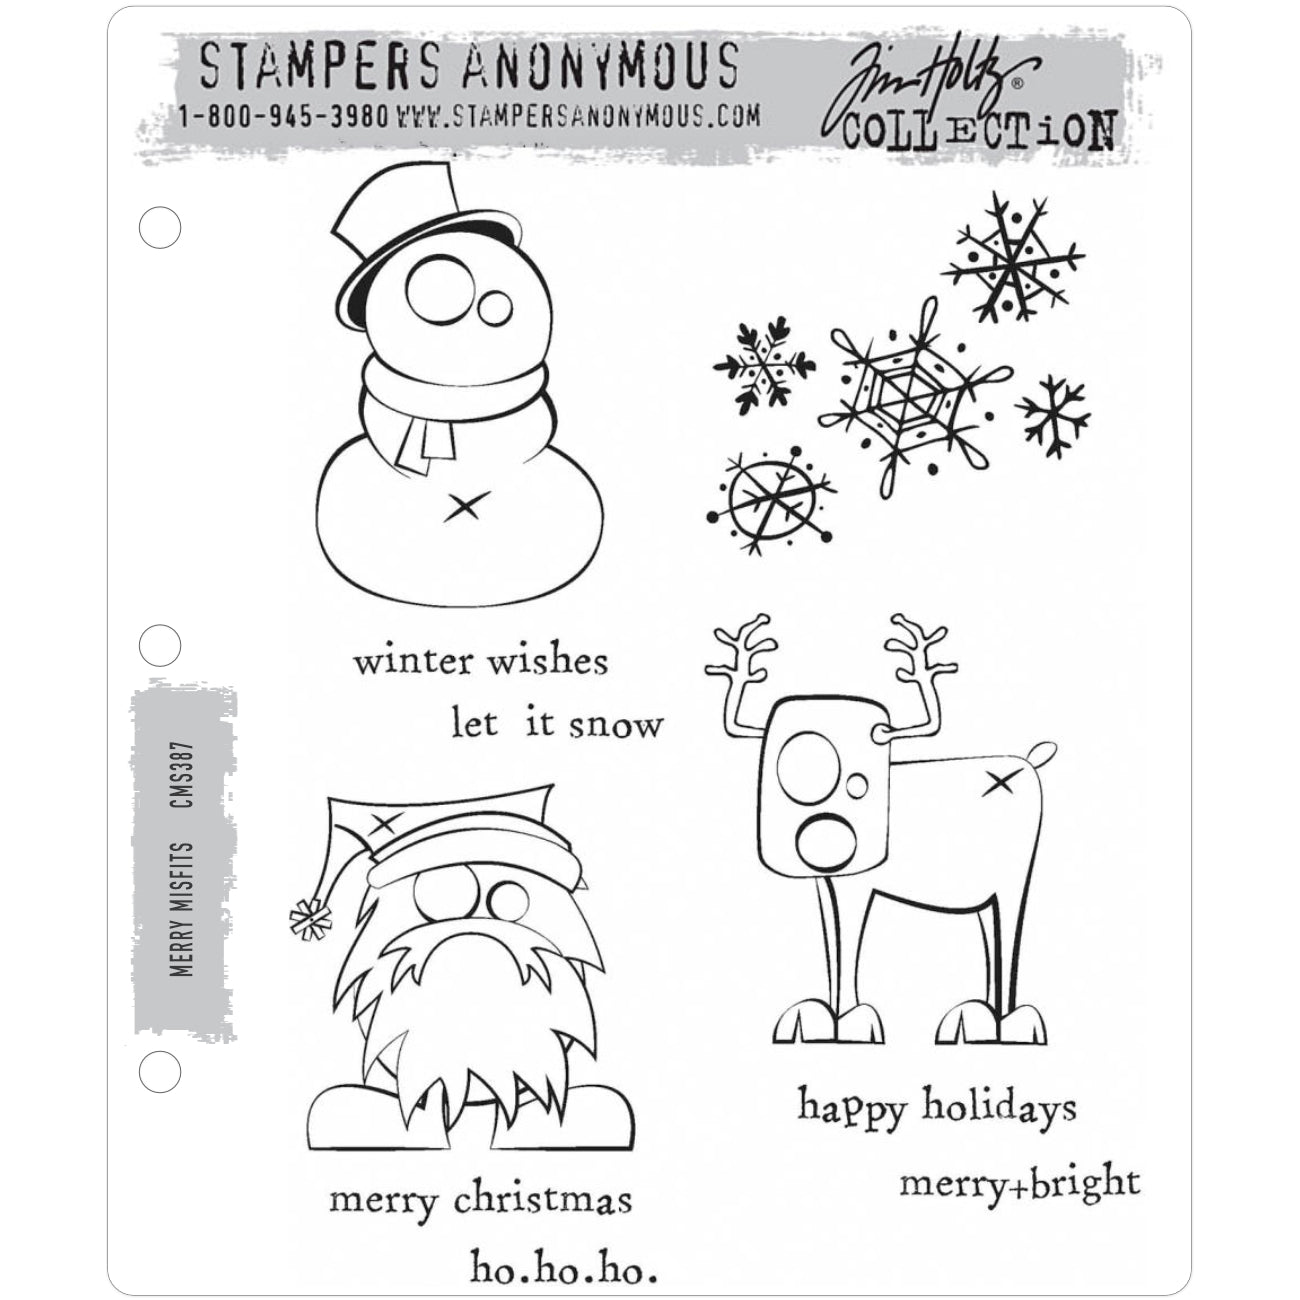 Merry Misfits ... 10 rubber stamps by Tim Holtz (CMS387)